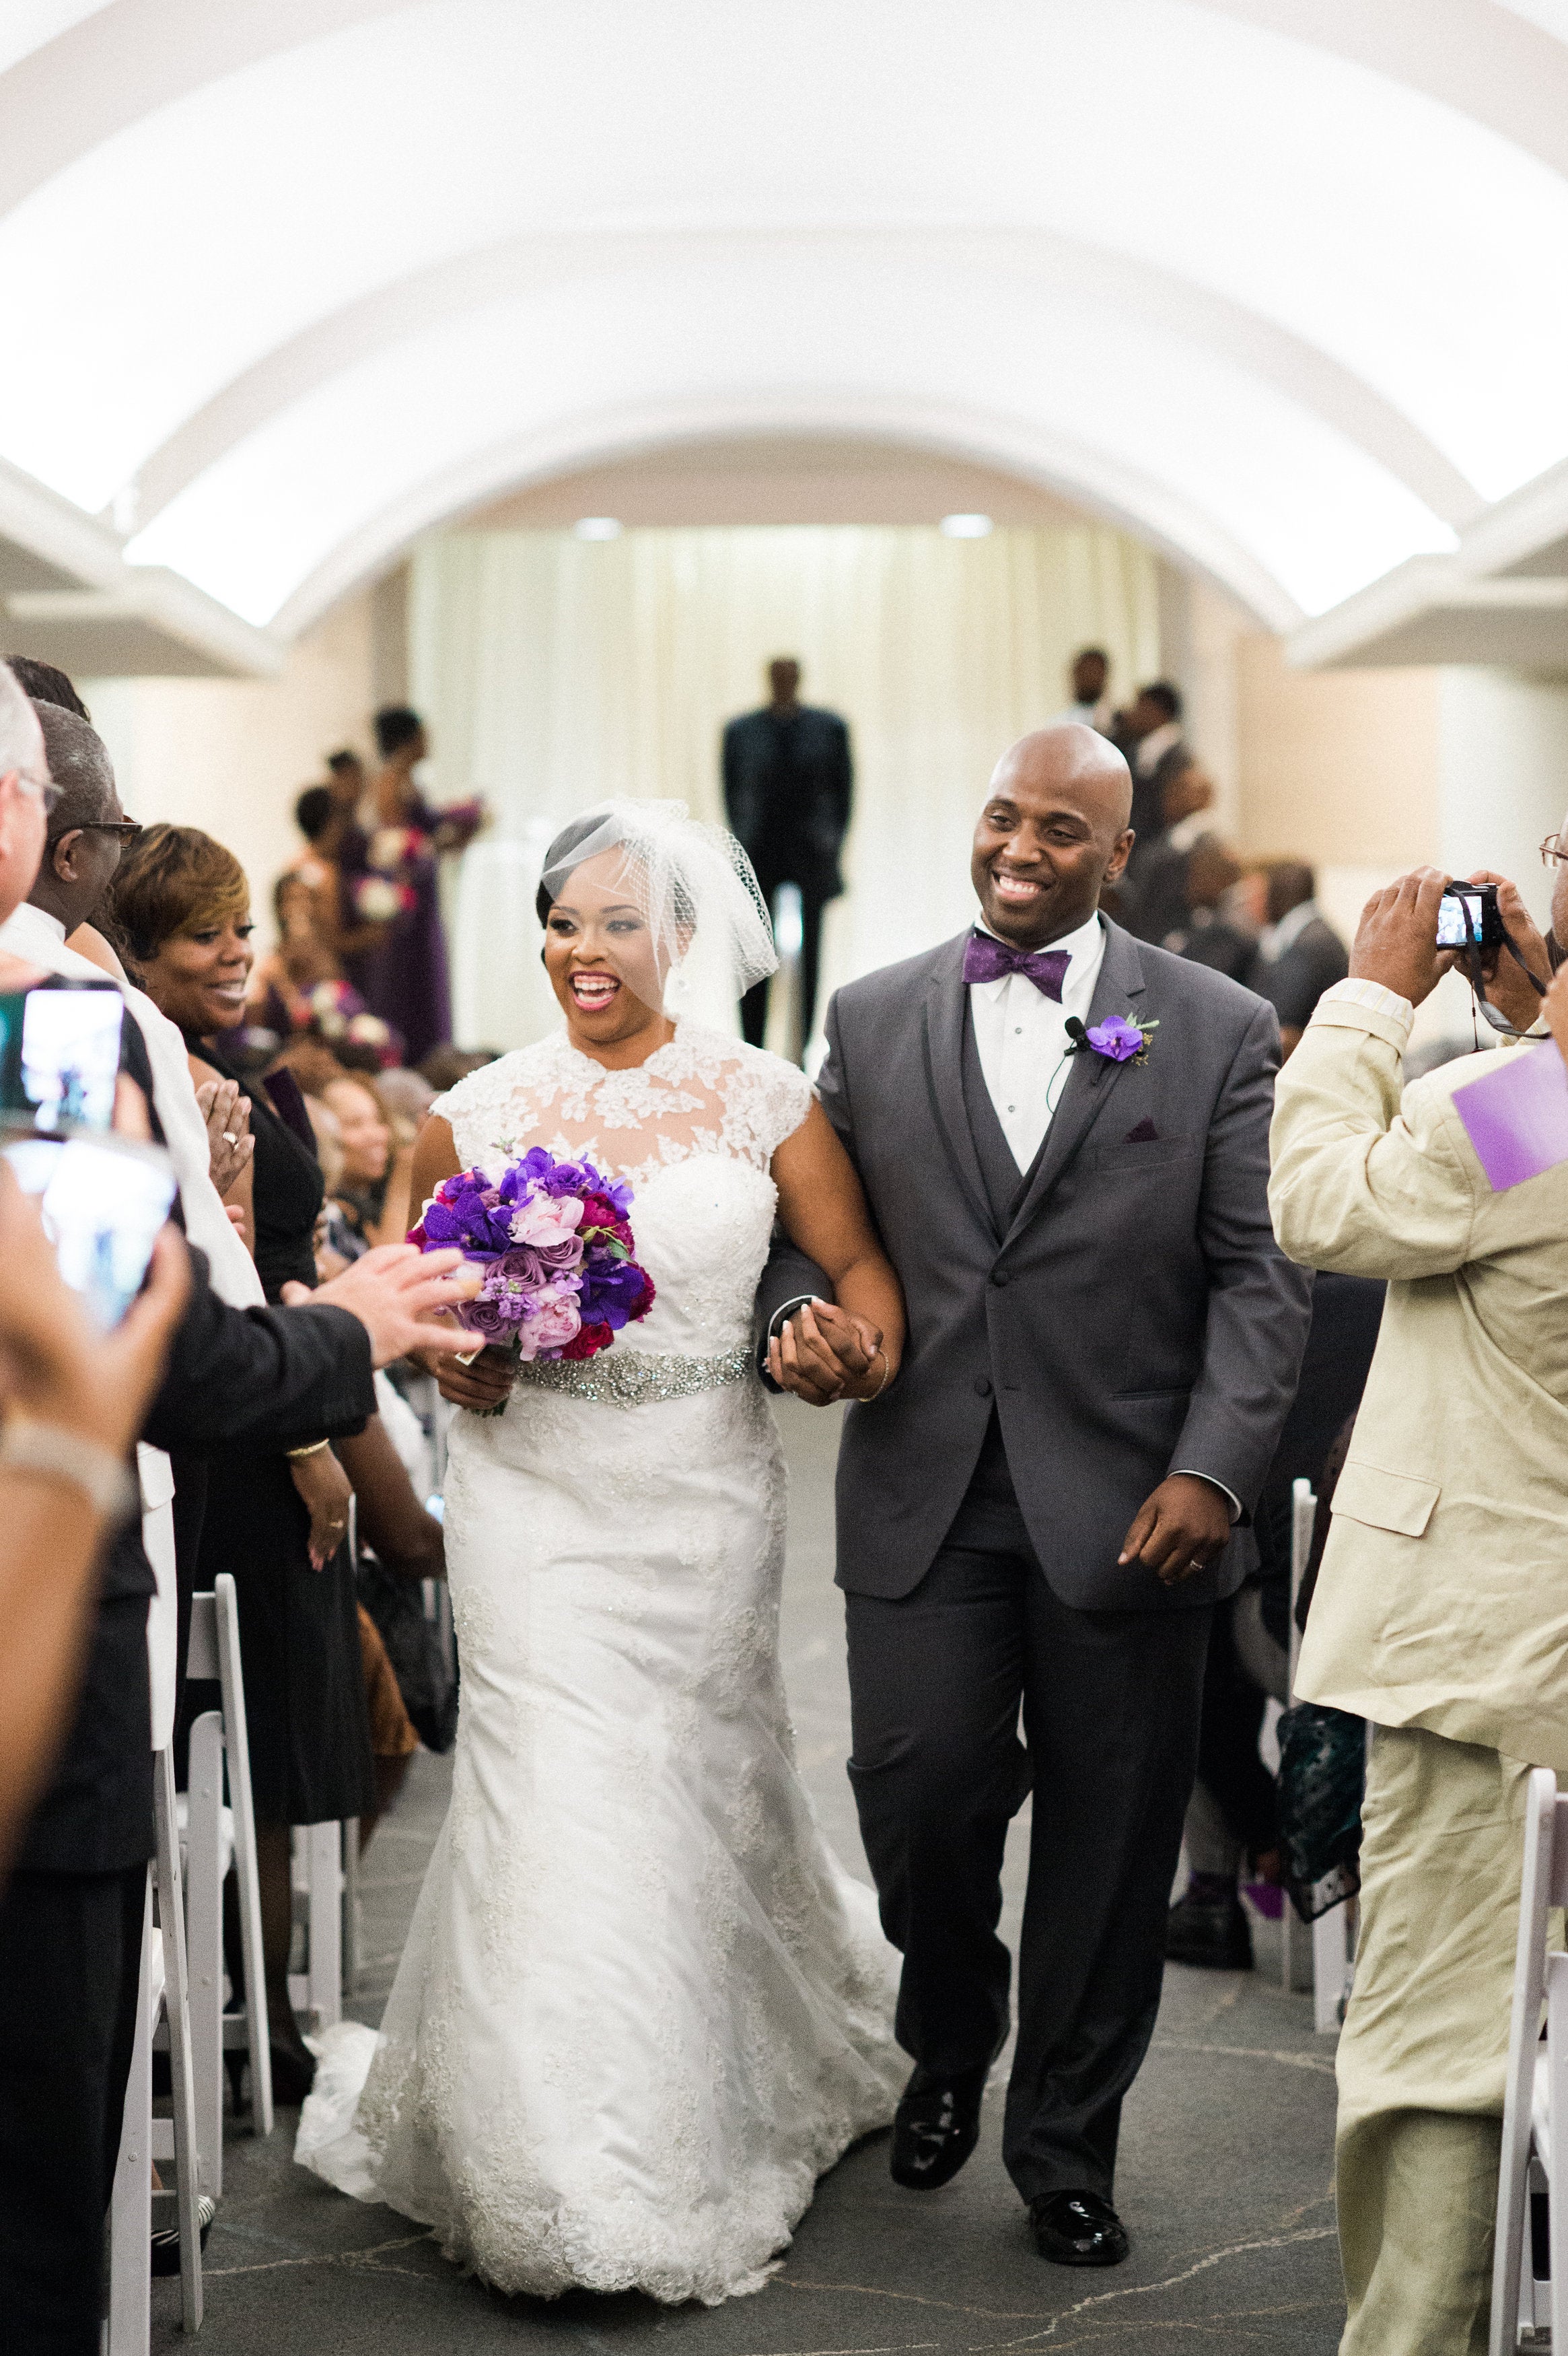 Bridal Bliss: Jeff And Adrienne's Atlanta Wedding Style Takes the Cake
